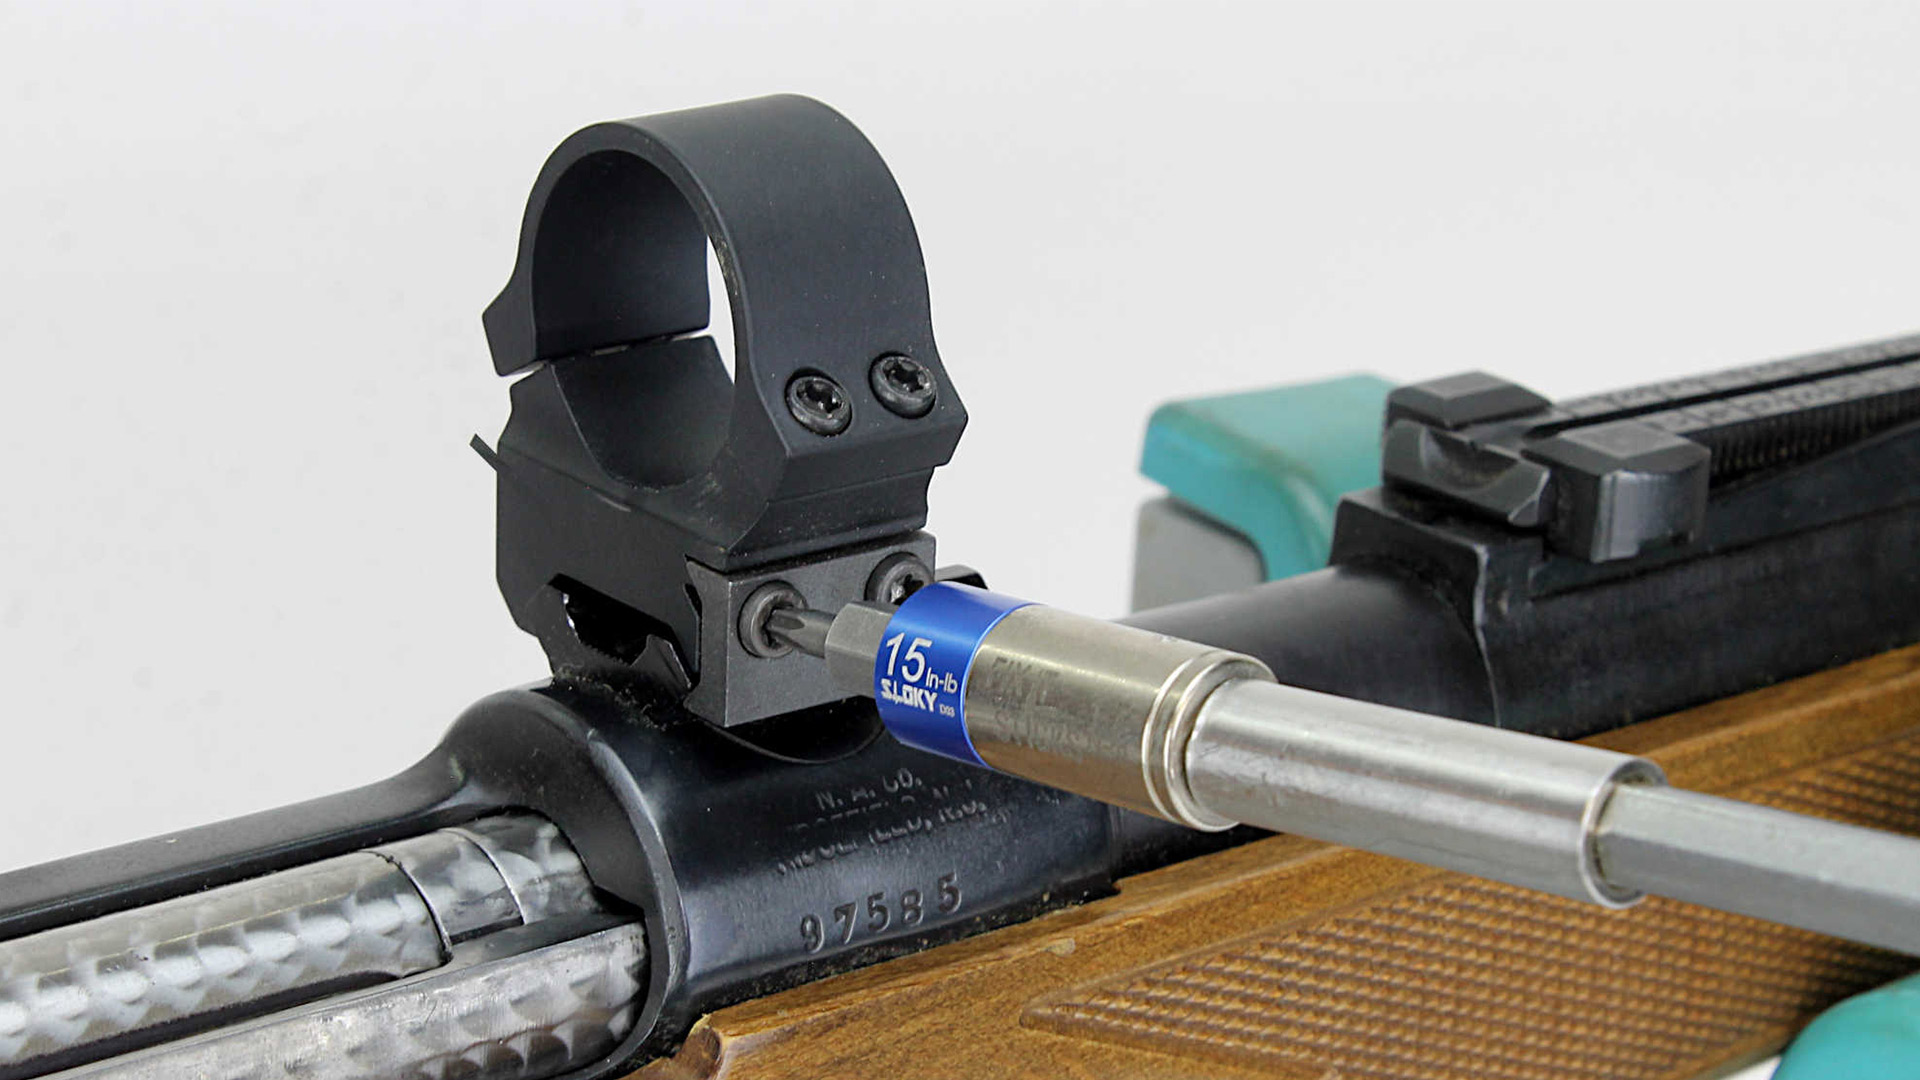 Torque wrench (limiter) for scope rings.